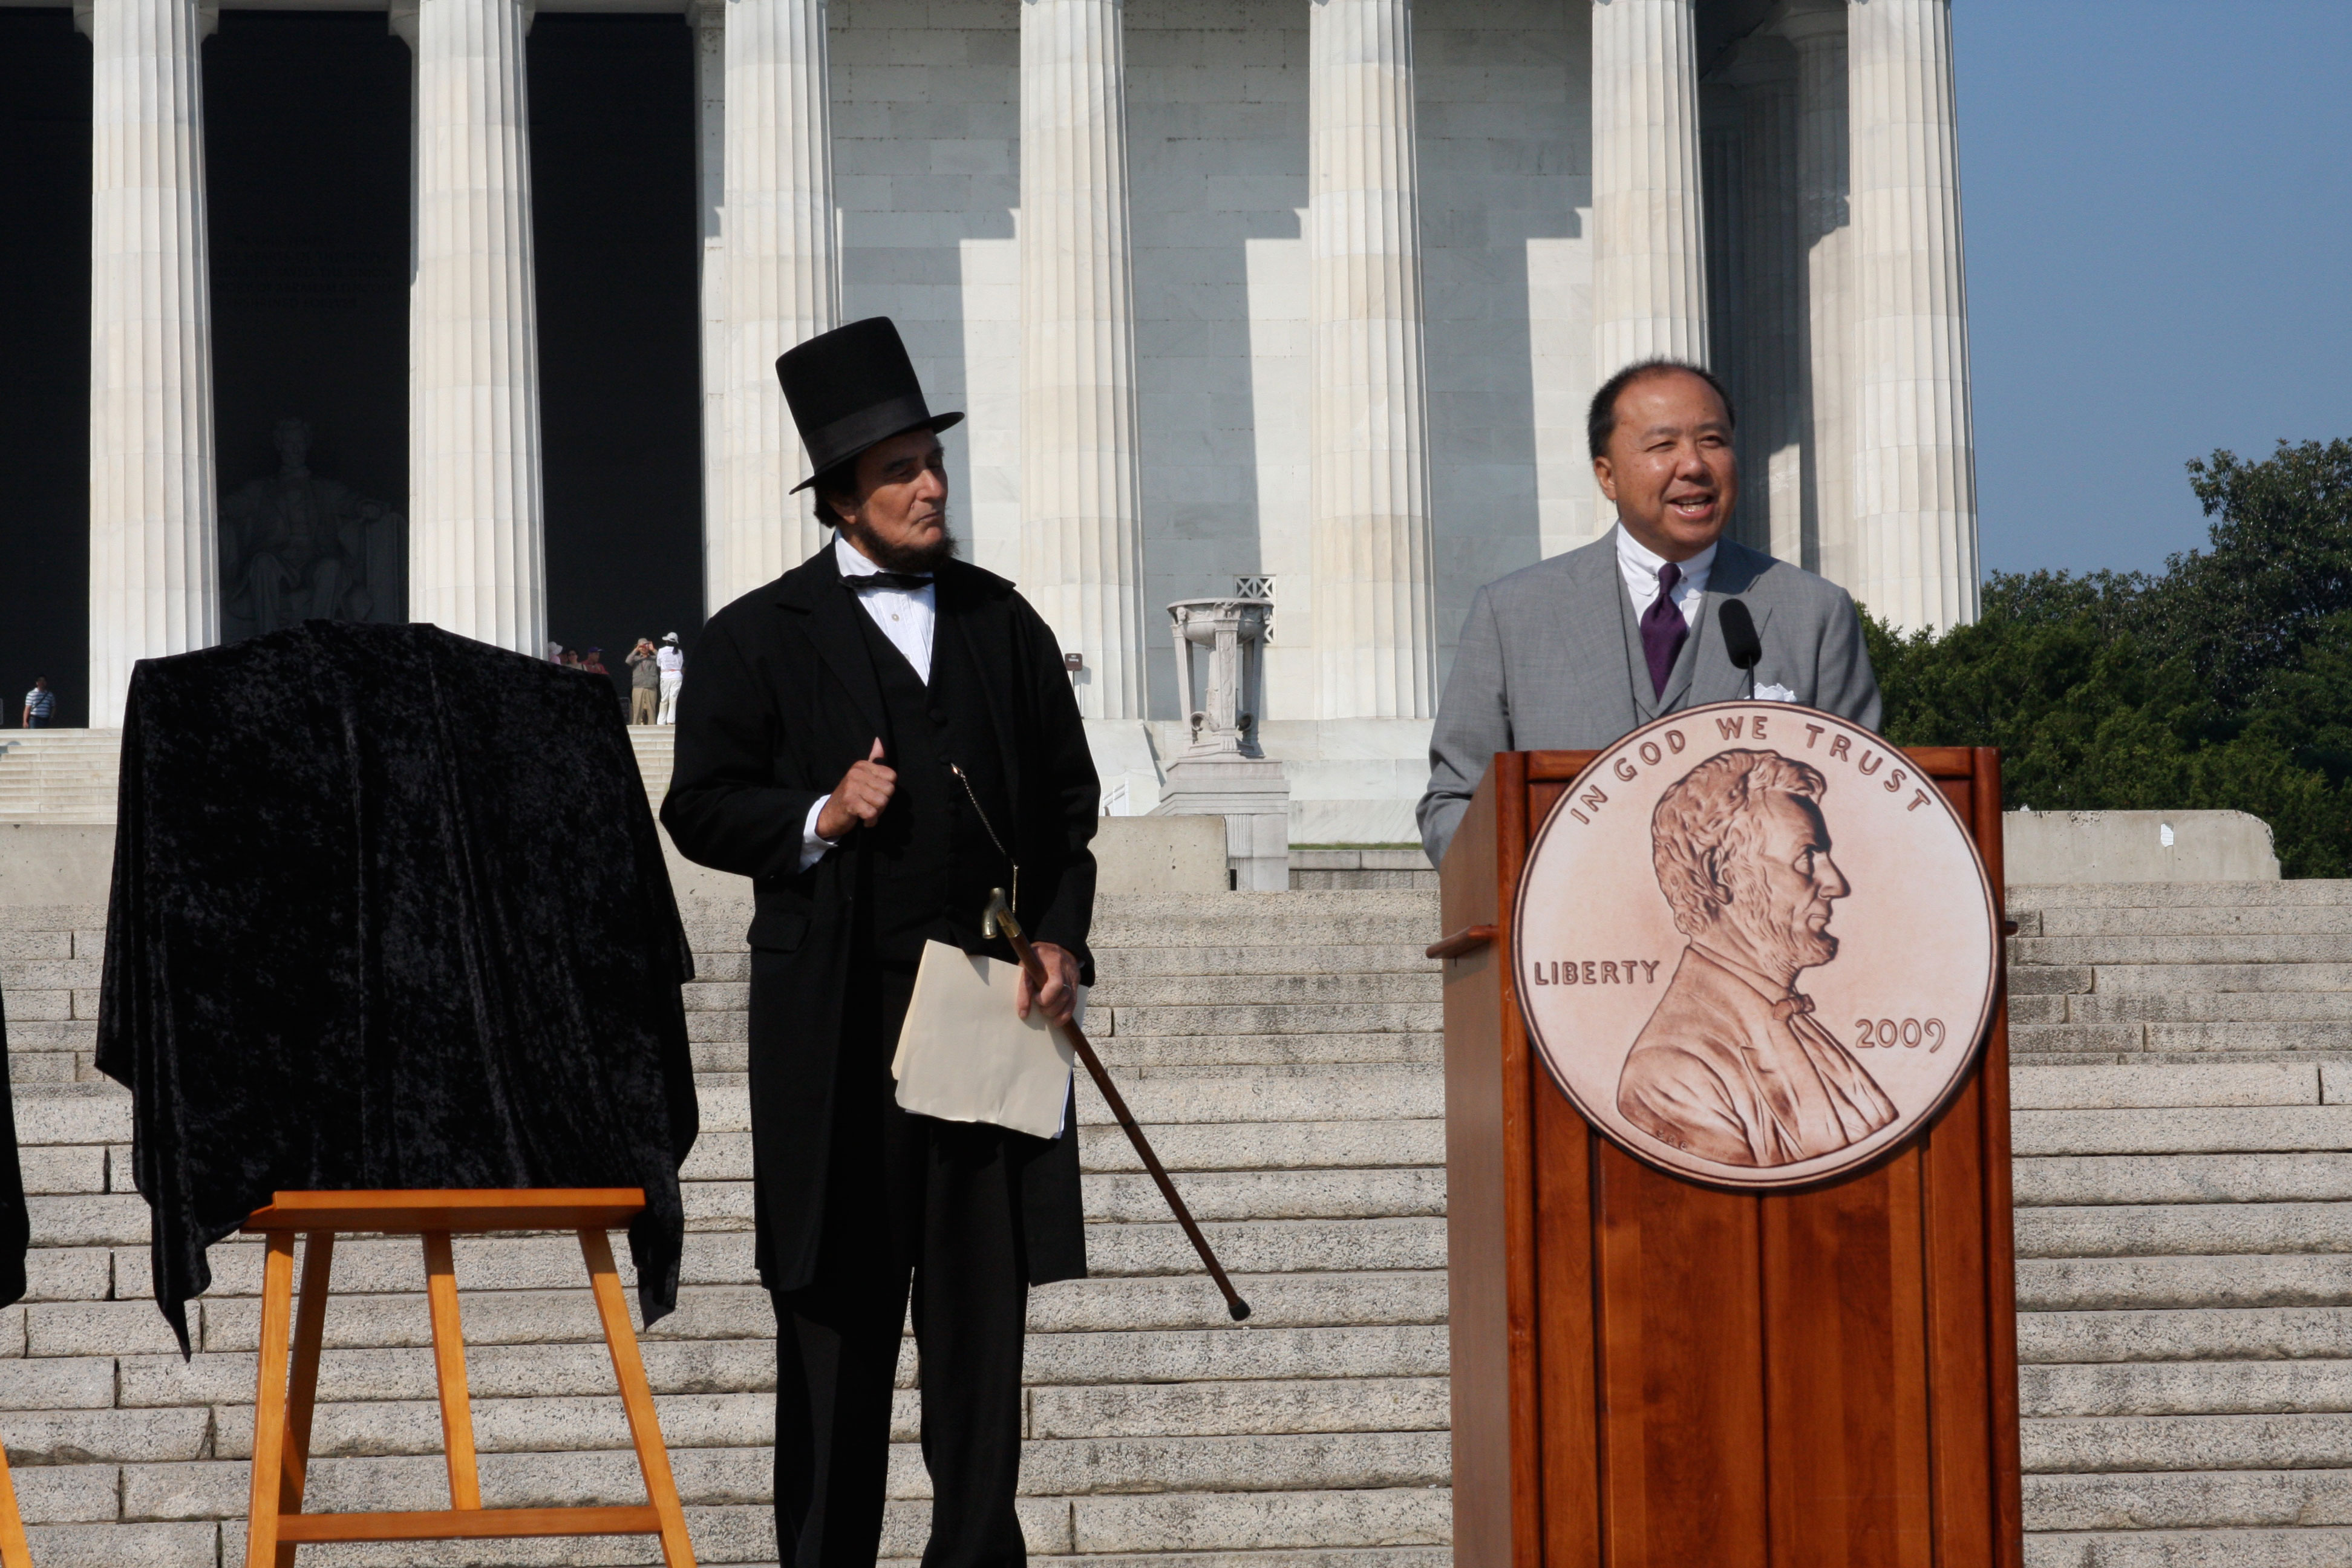 With President Abraham Lincoln, I am delivering remarks before unveiling the four new penny designs to celebrate the Lincoln bicentennial in 2009.